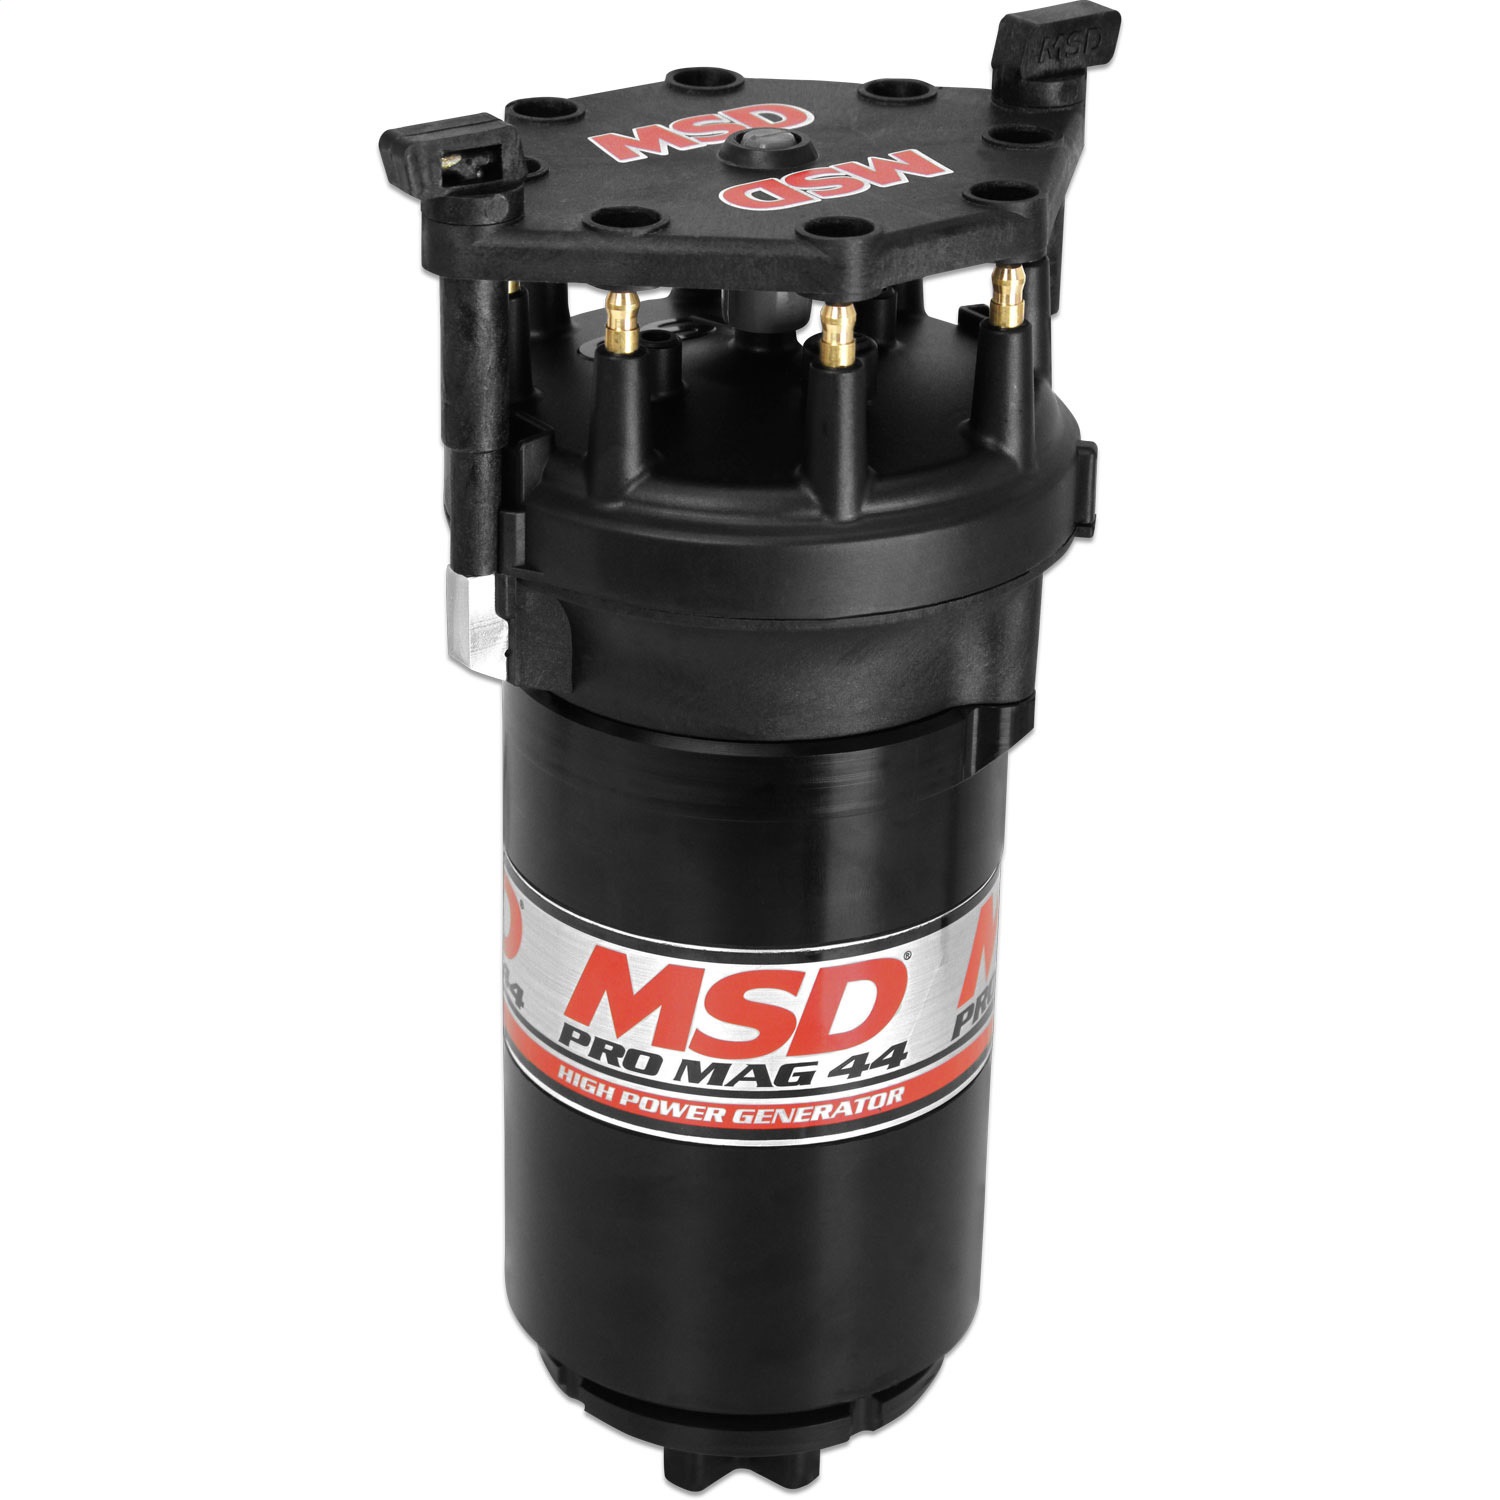 MSD Ignition MSD Ignition 81403 Pro Mag Generator